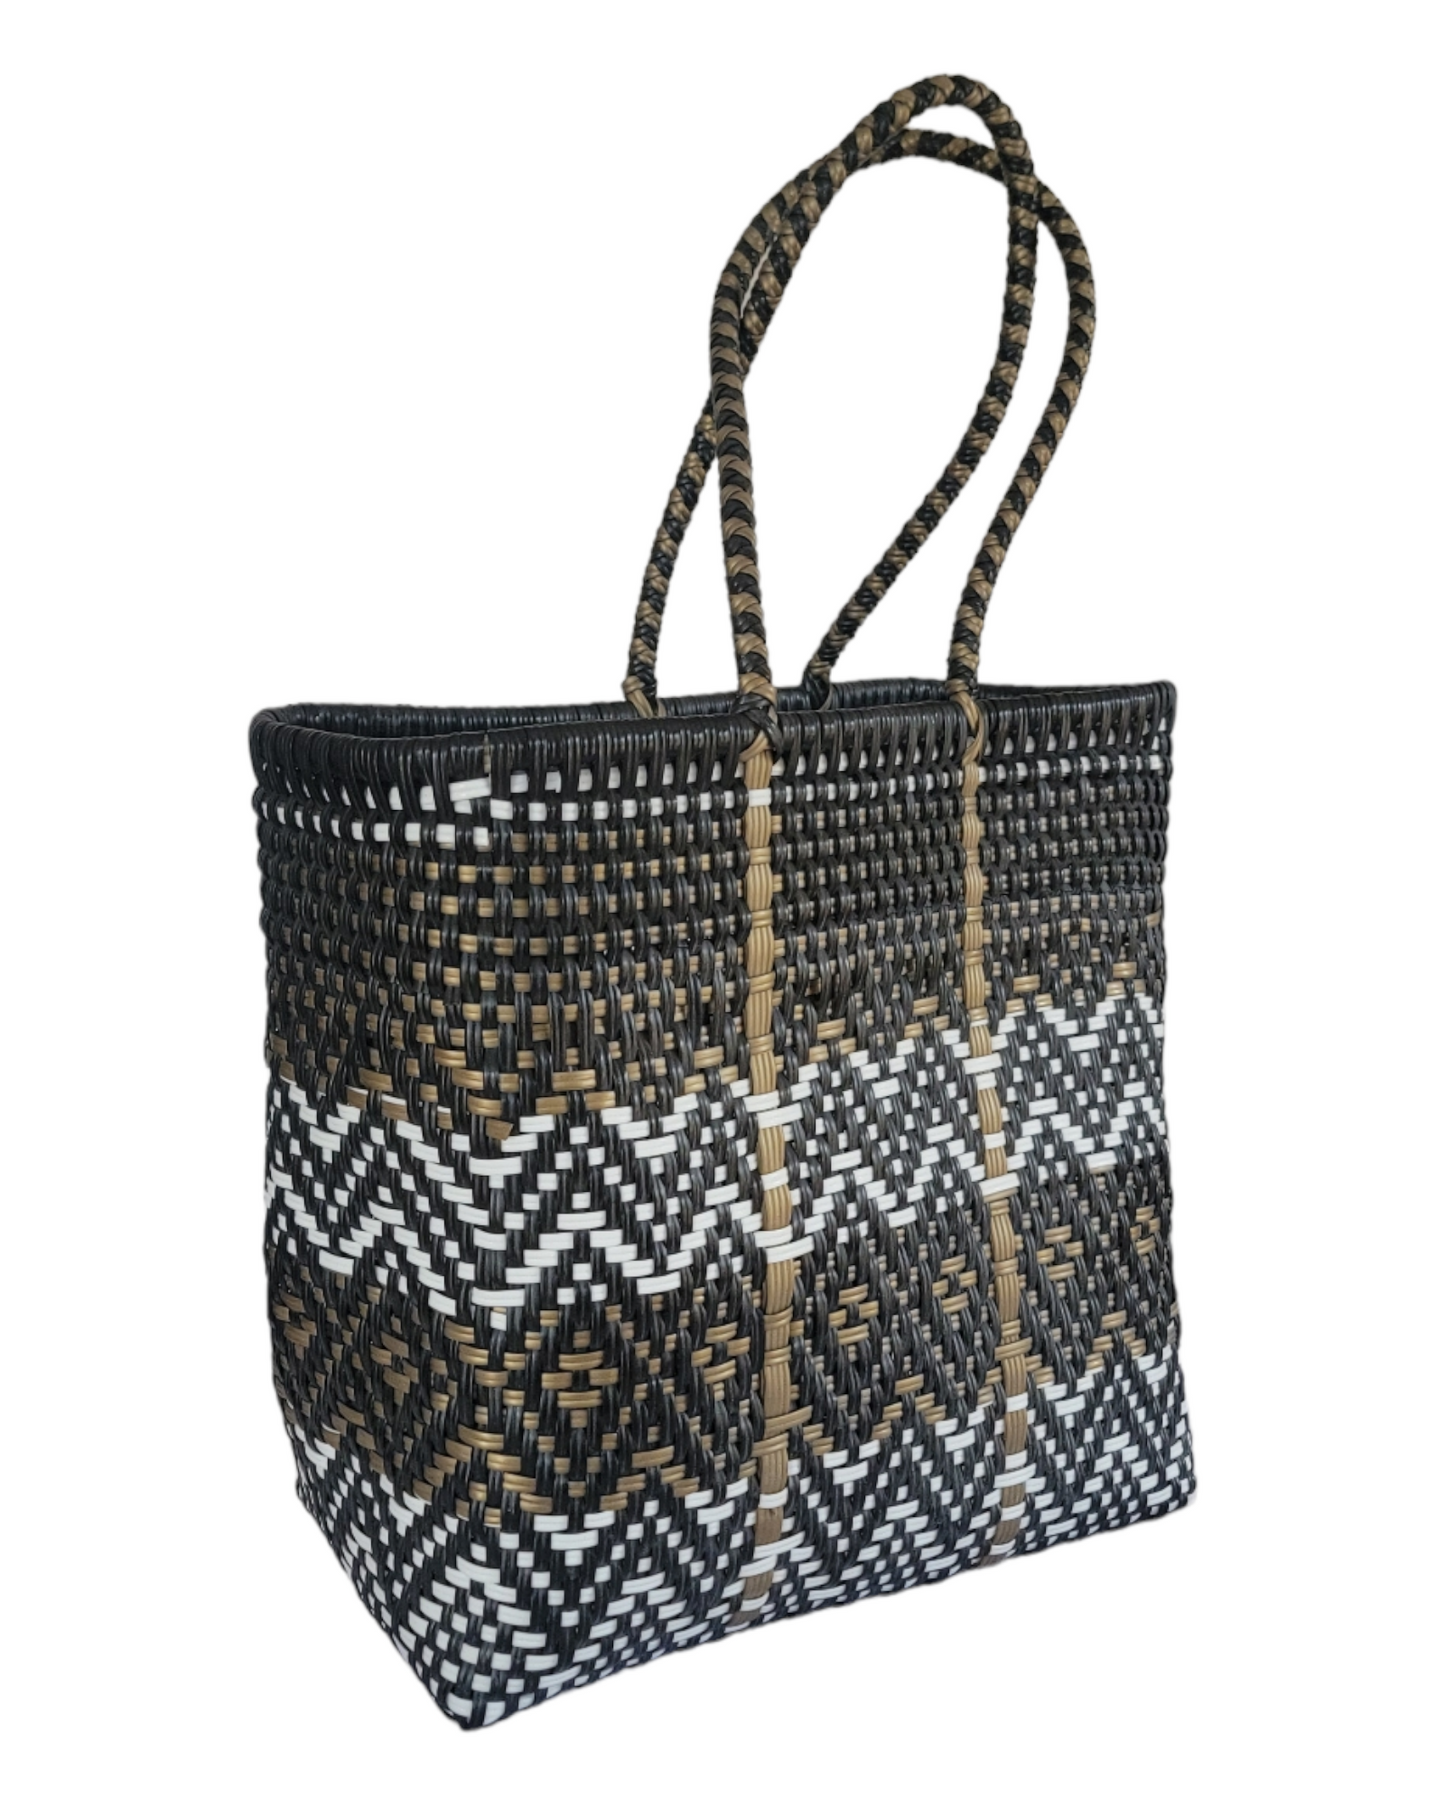 Be Praia | Black, Gold & White Medium Tote | Handwoven Recycled Bags